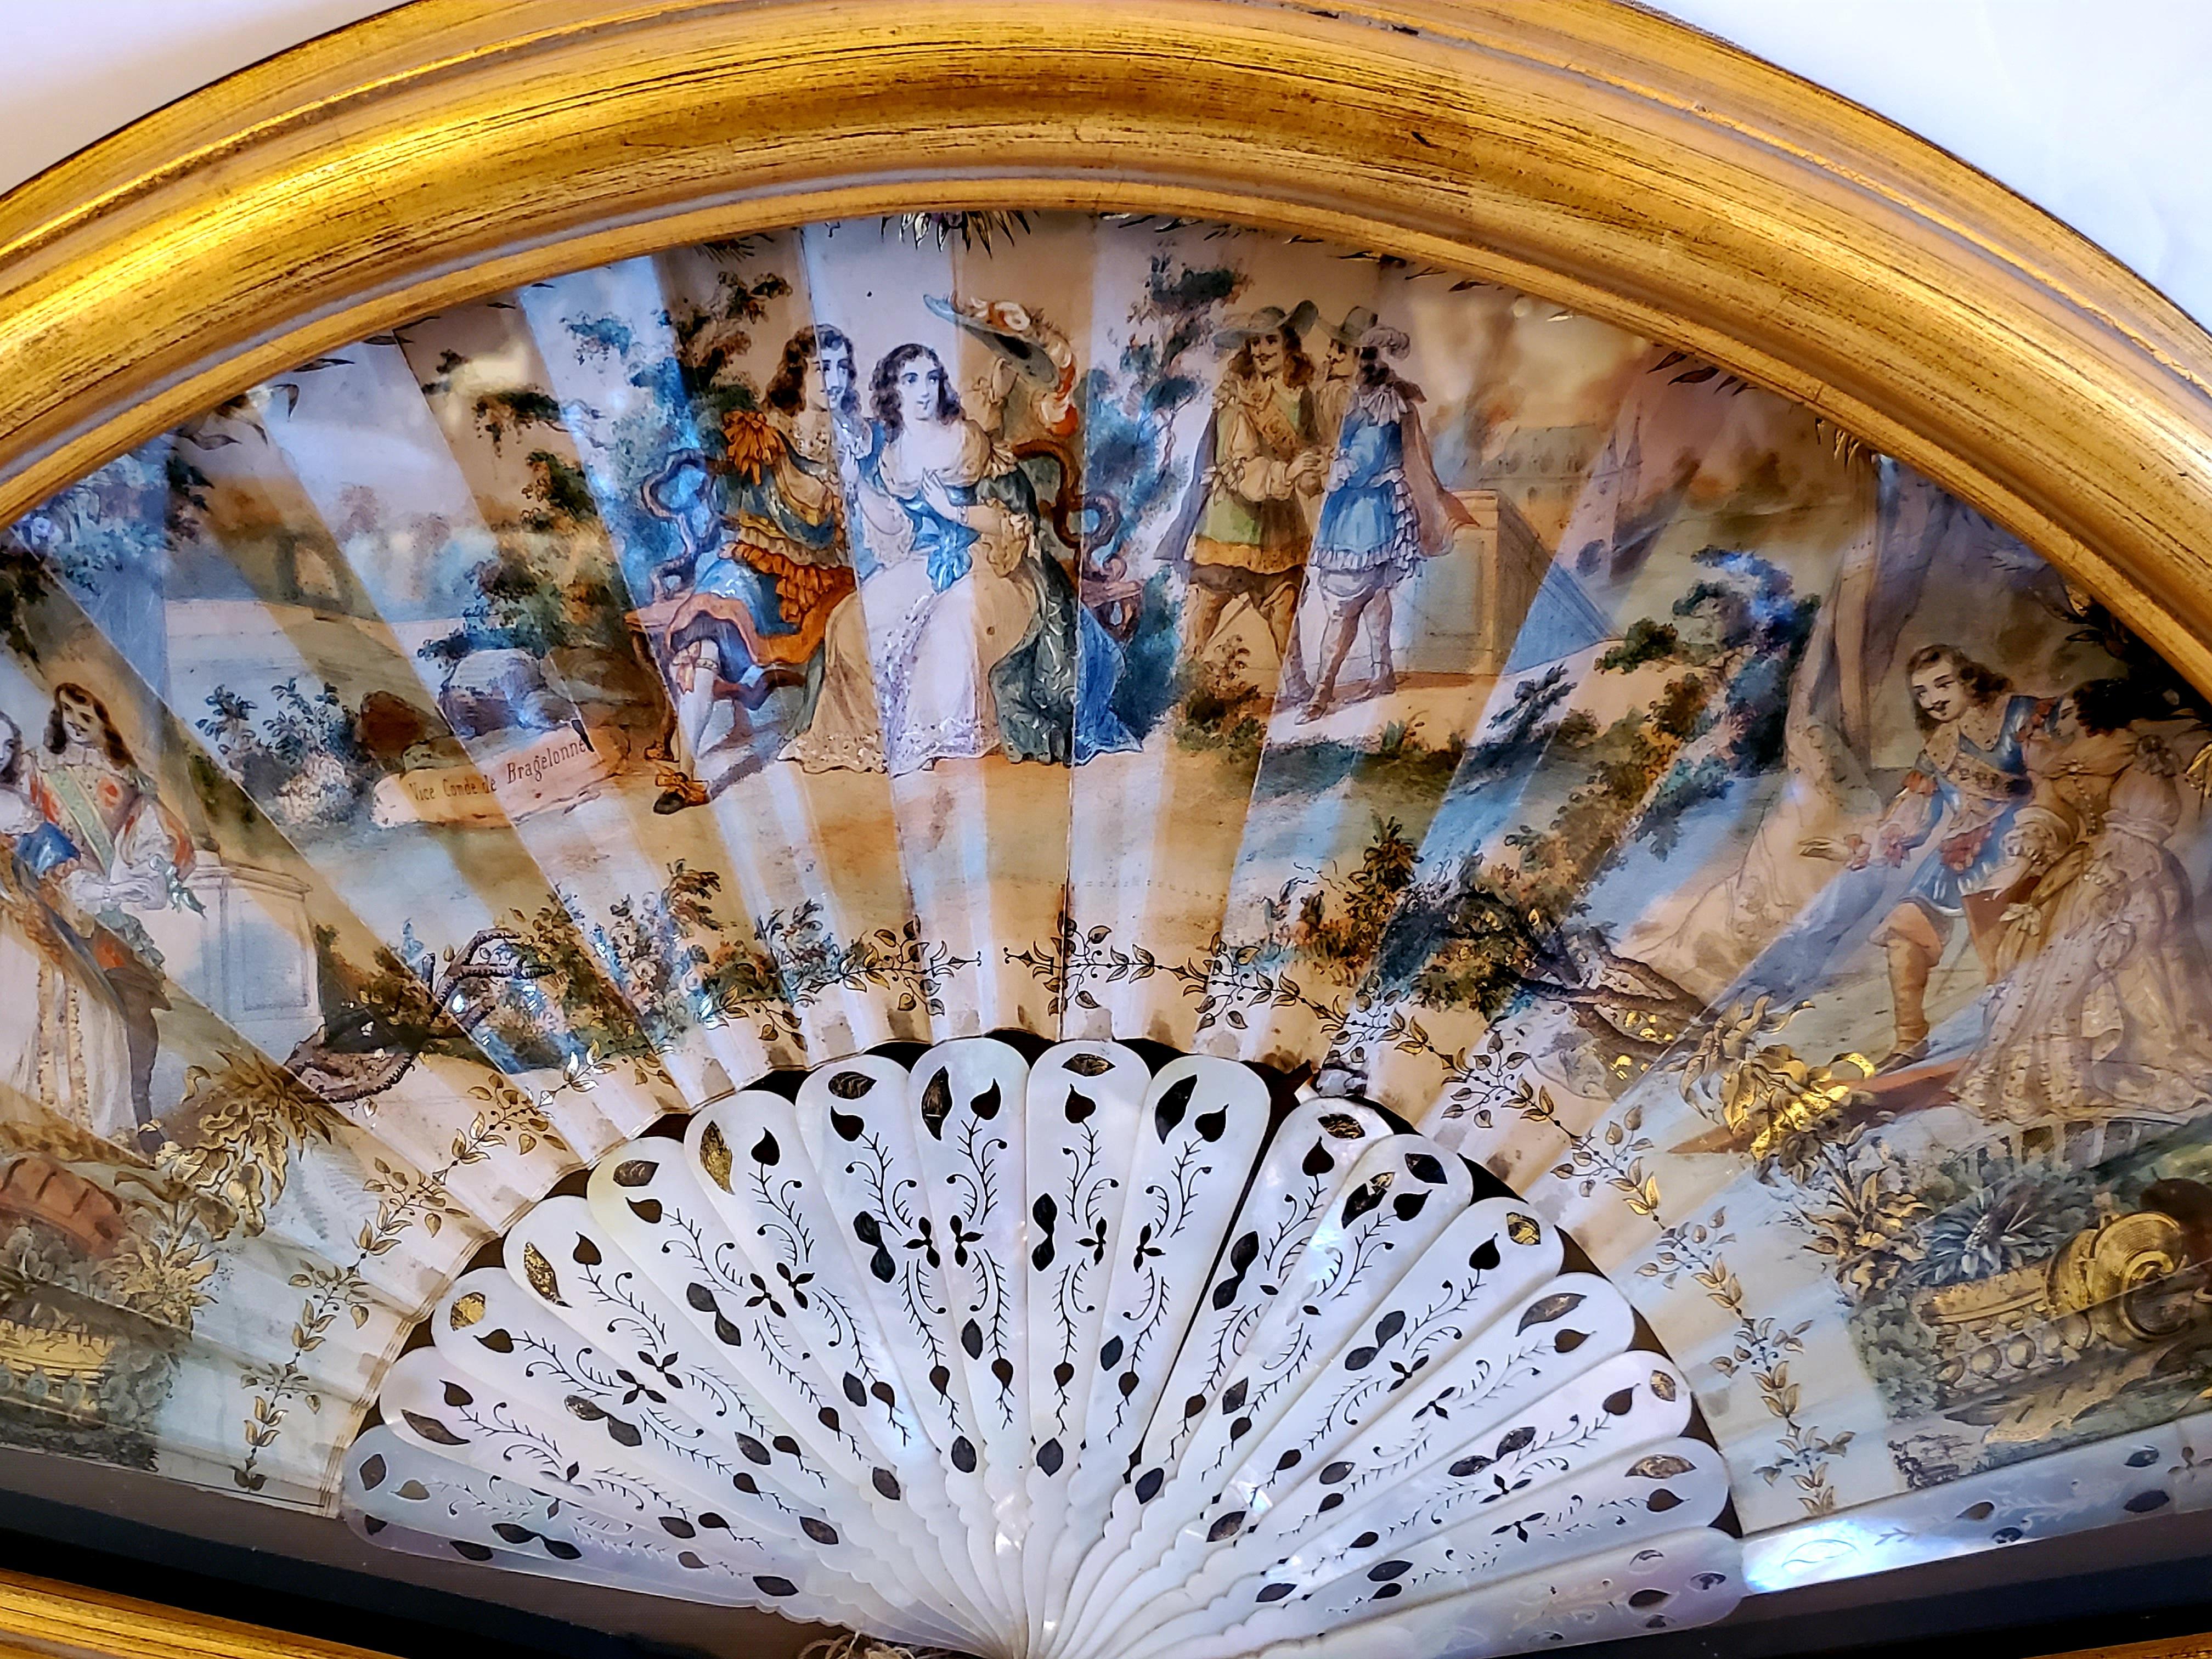 Lovely 19th century fan from the collection of Carole Luna from Cadiz Spain. Beautifully framed under glass with giltwood frame, it makes an extraordinary piece of art.